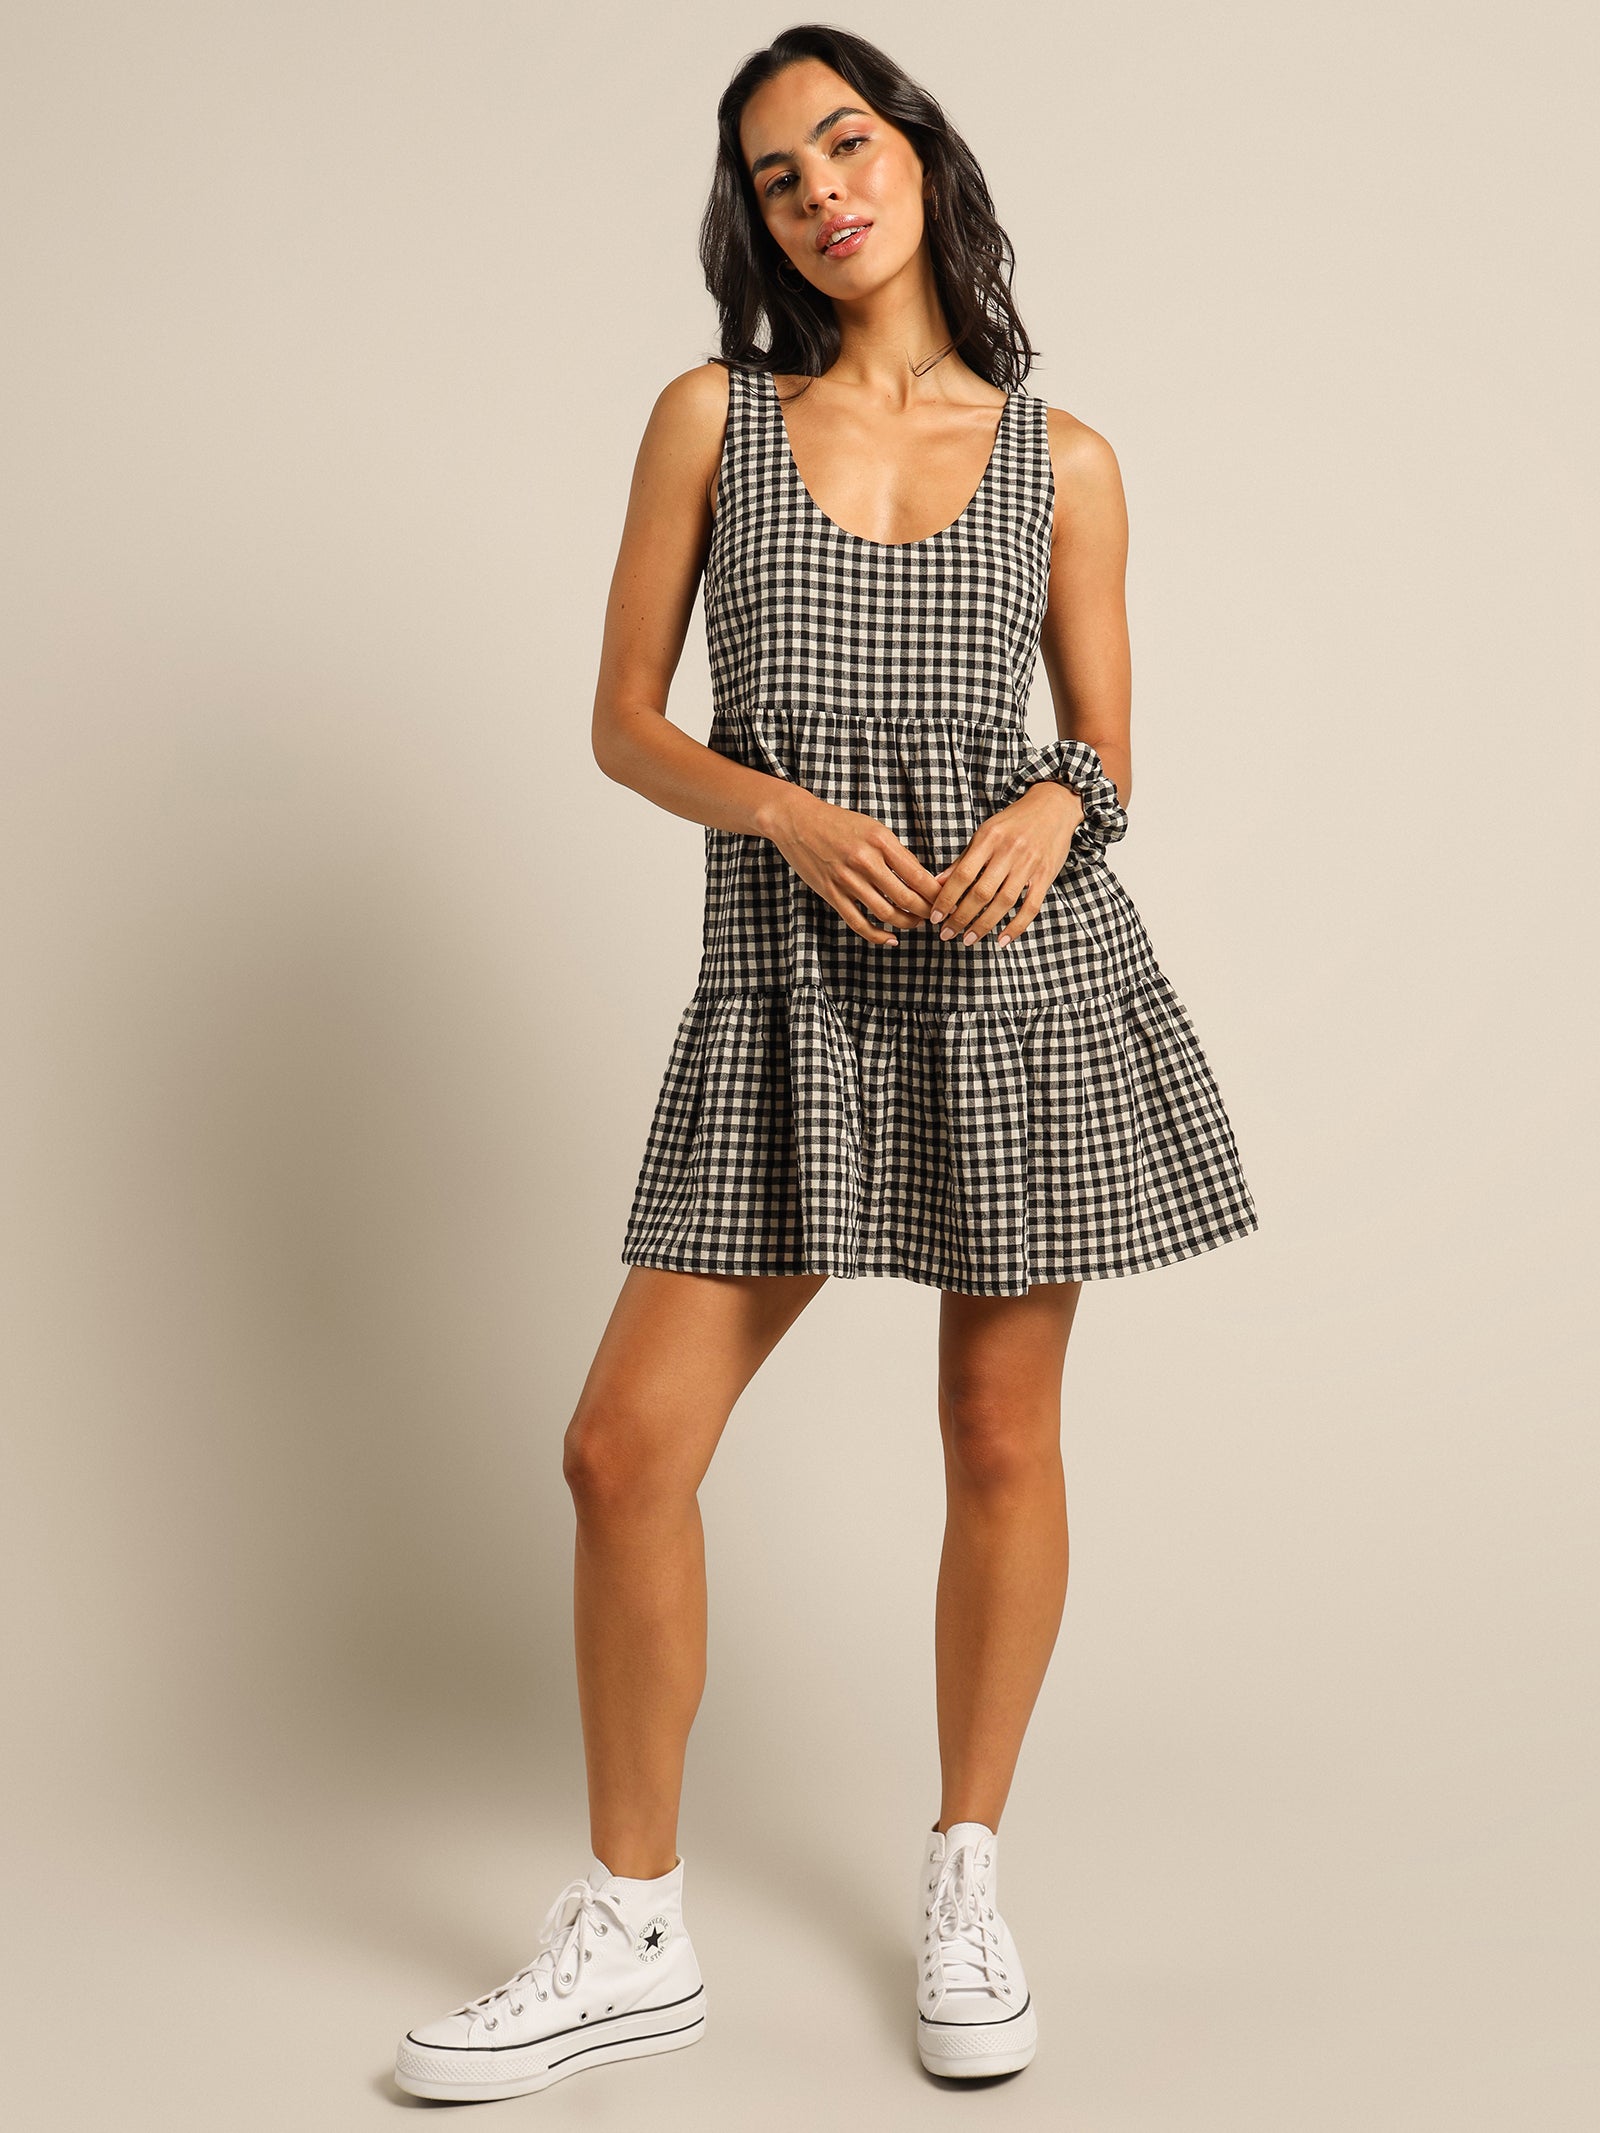 Penny Check Dress in Black & White Gingham